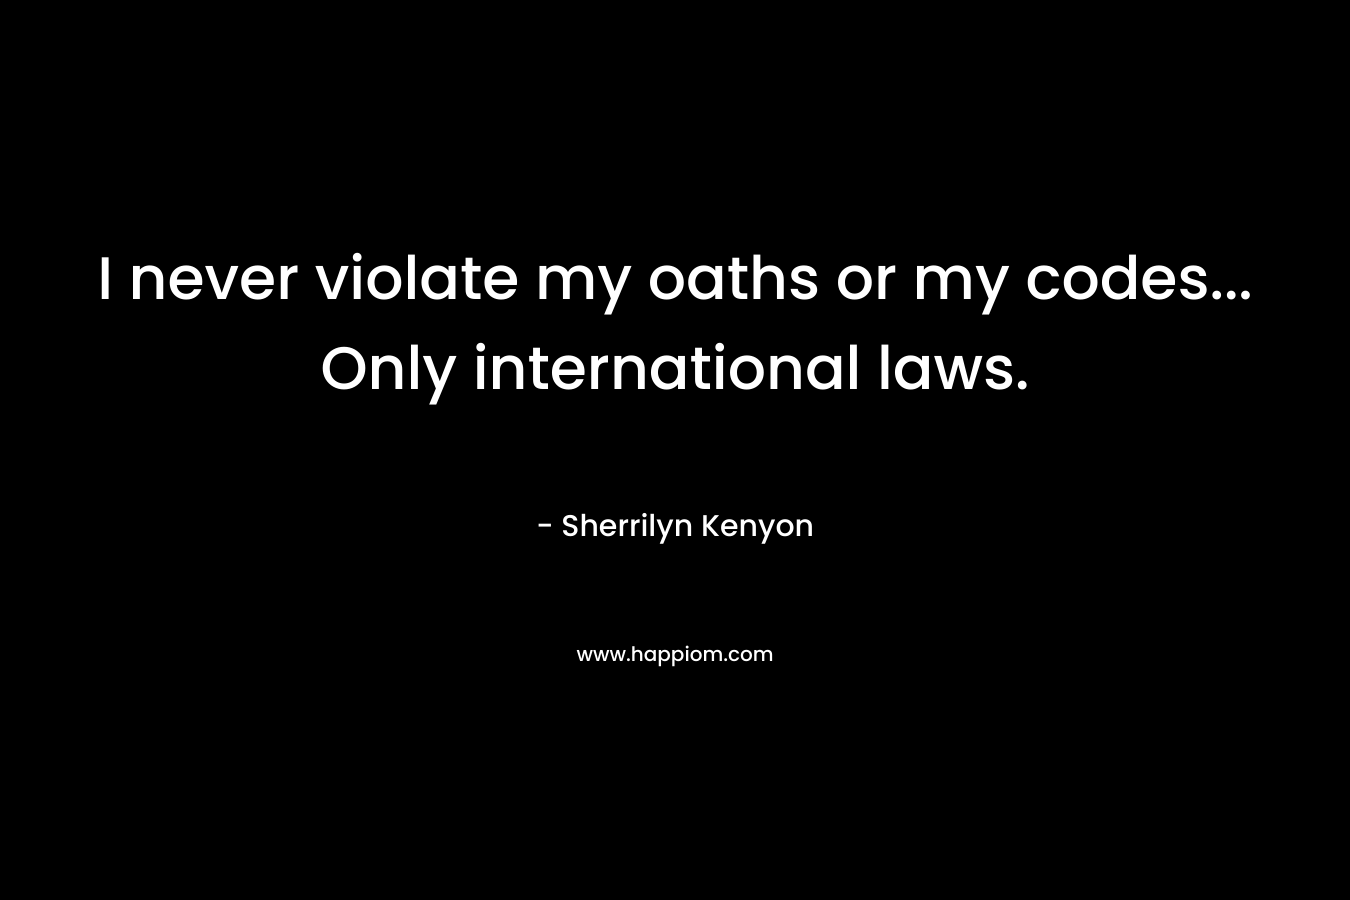 I never violate my oaths or my codes... Only international laws.